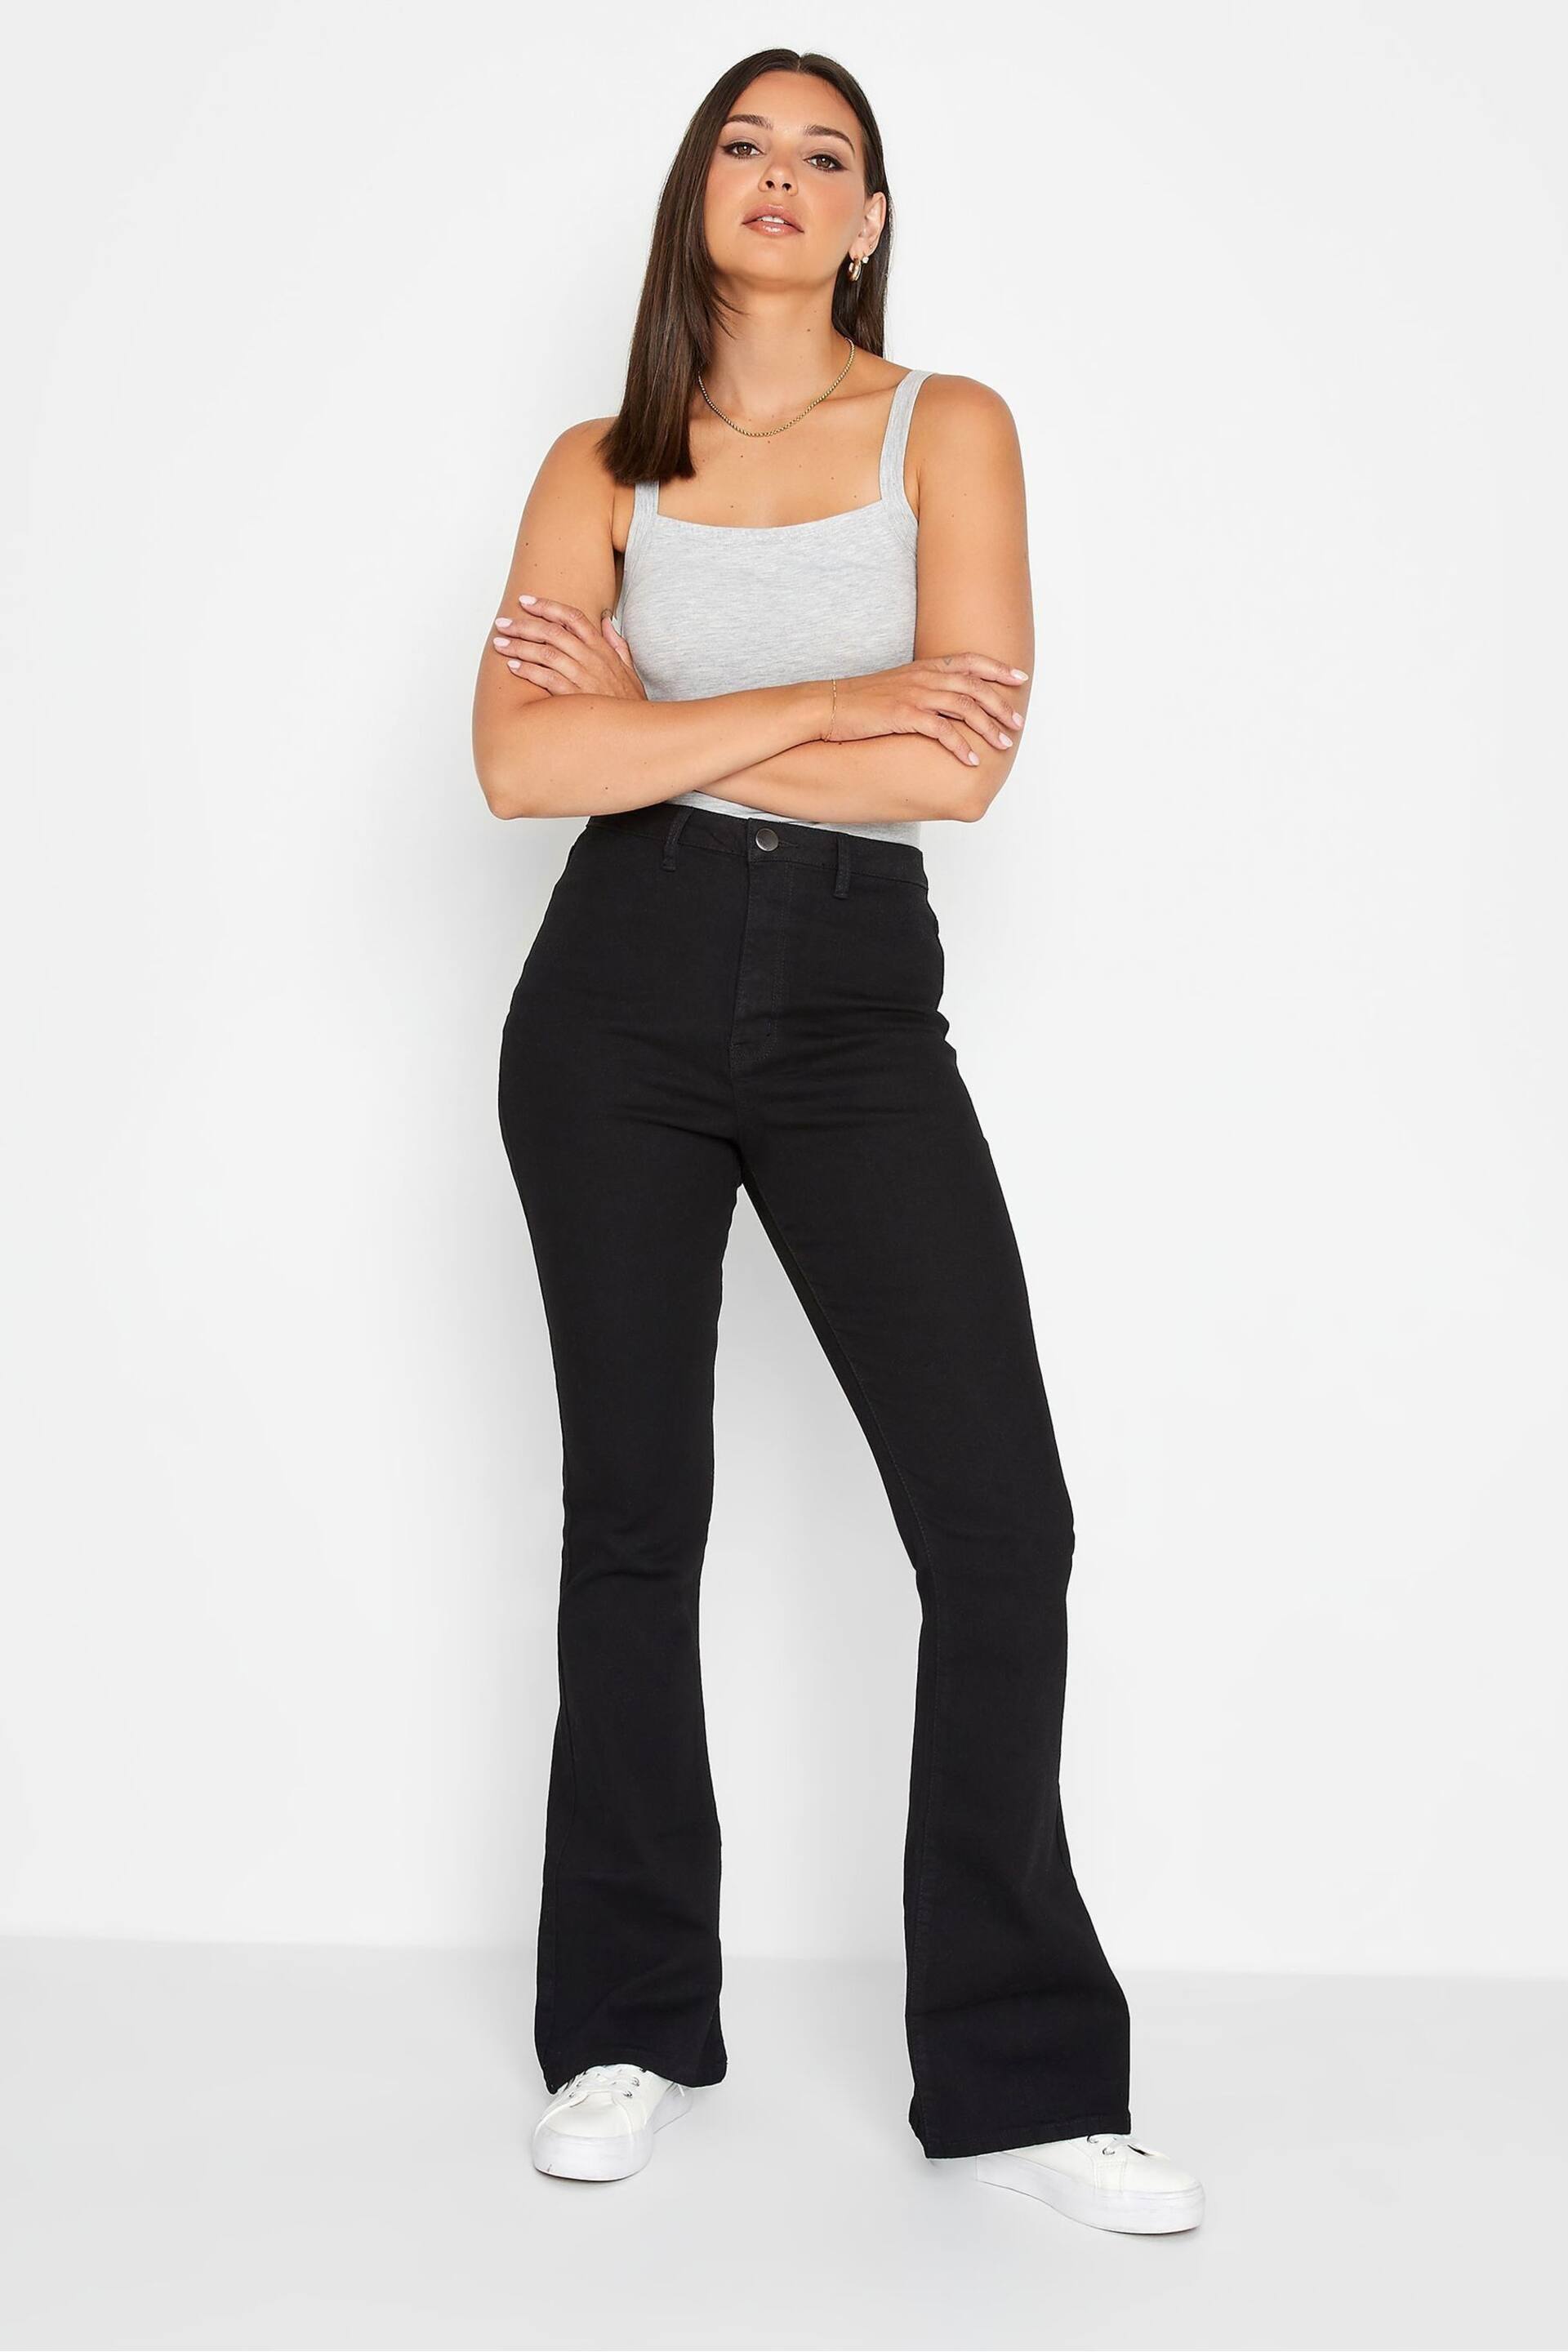 Long Tall Sally Black Denim Flared Jeans - Image 2 of 4